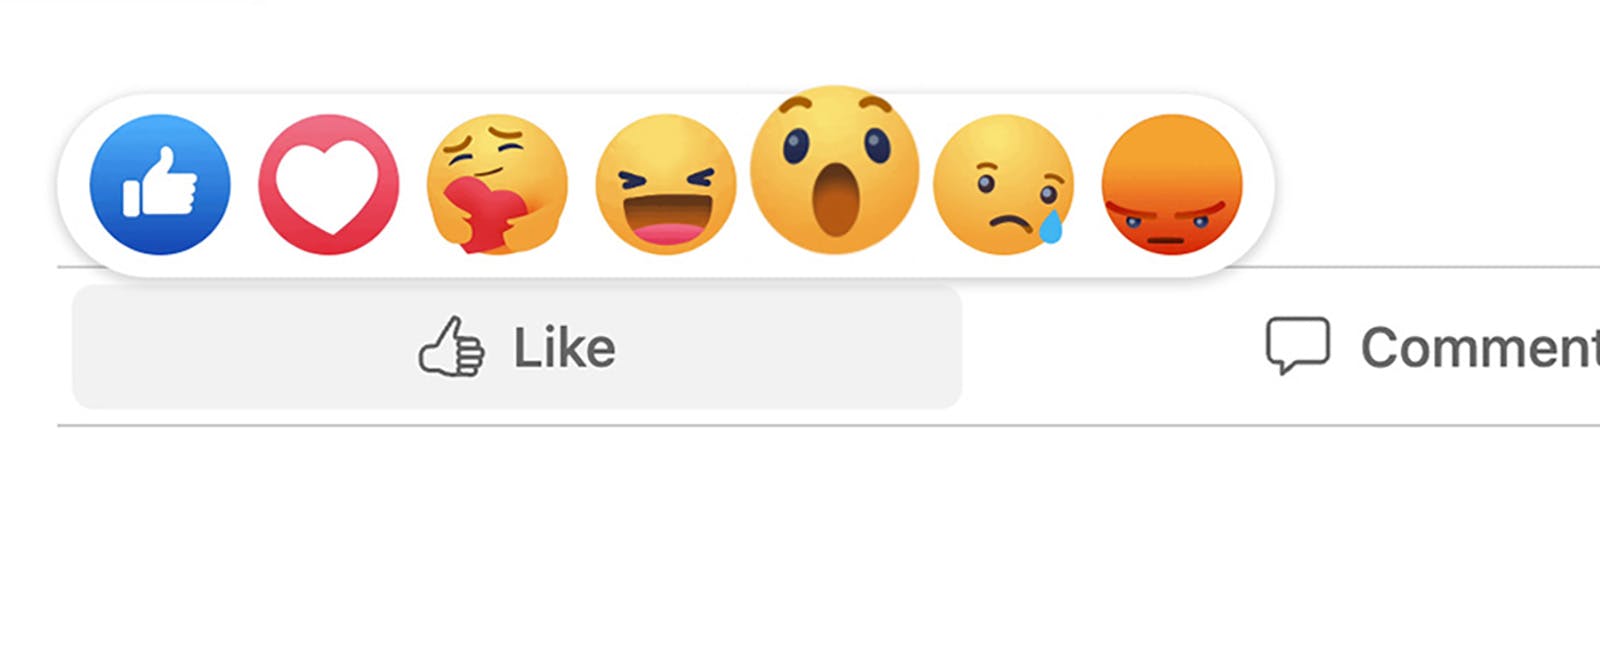 Facebook-Style Animated Reactions